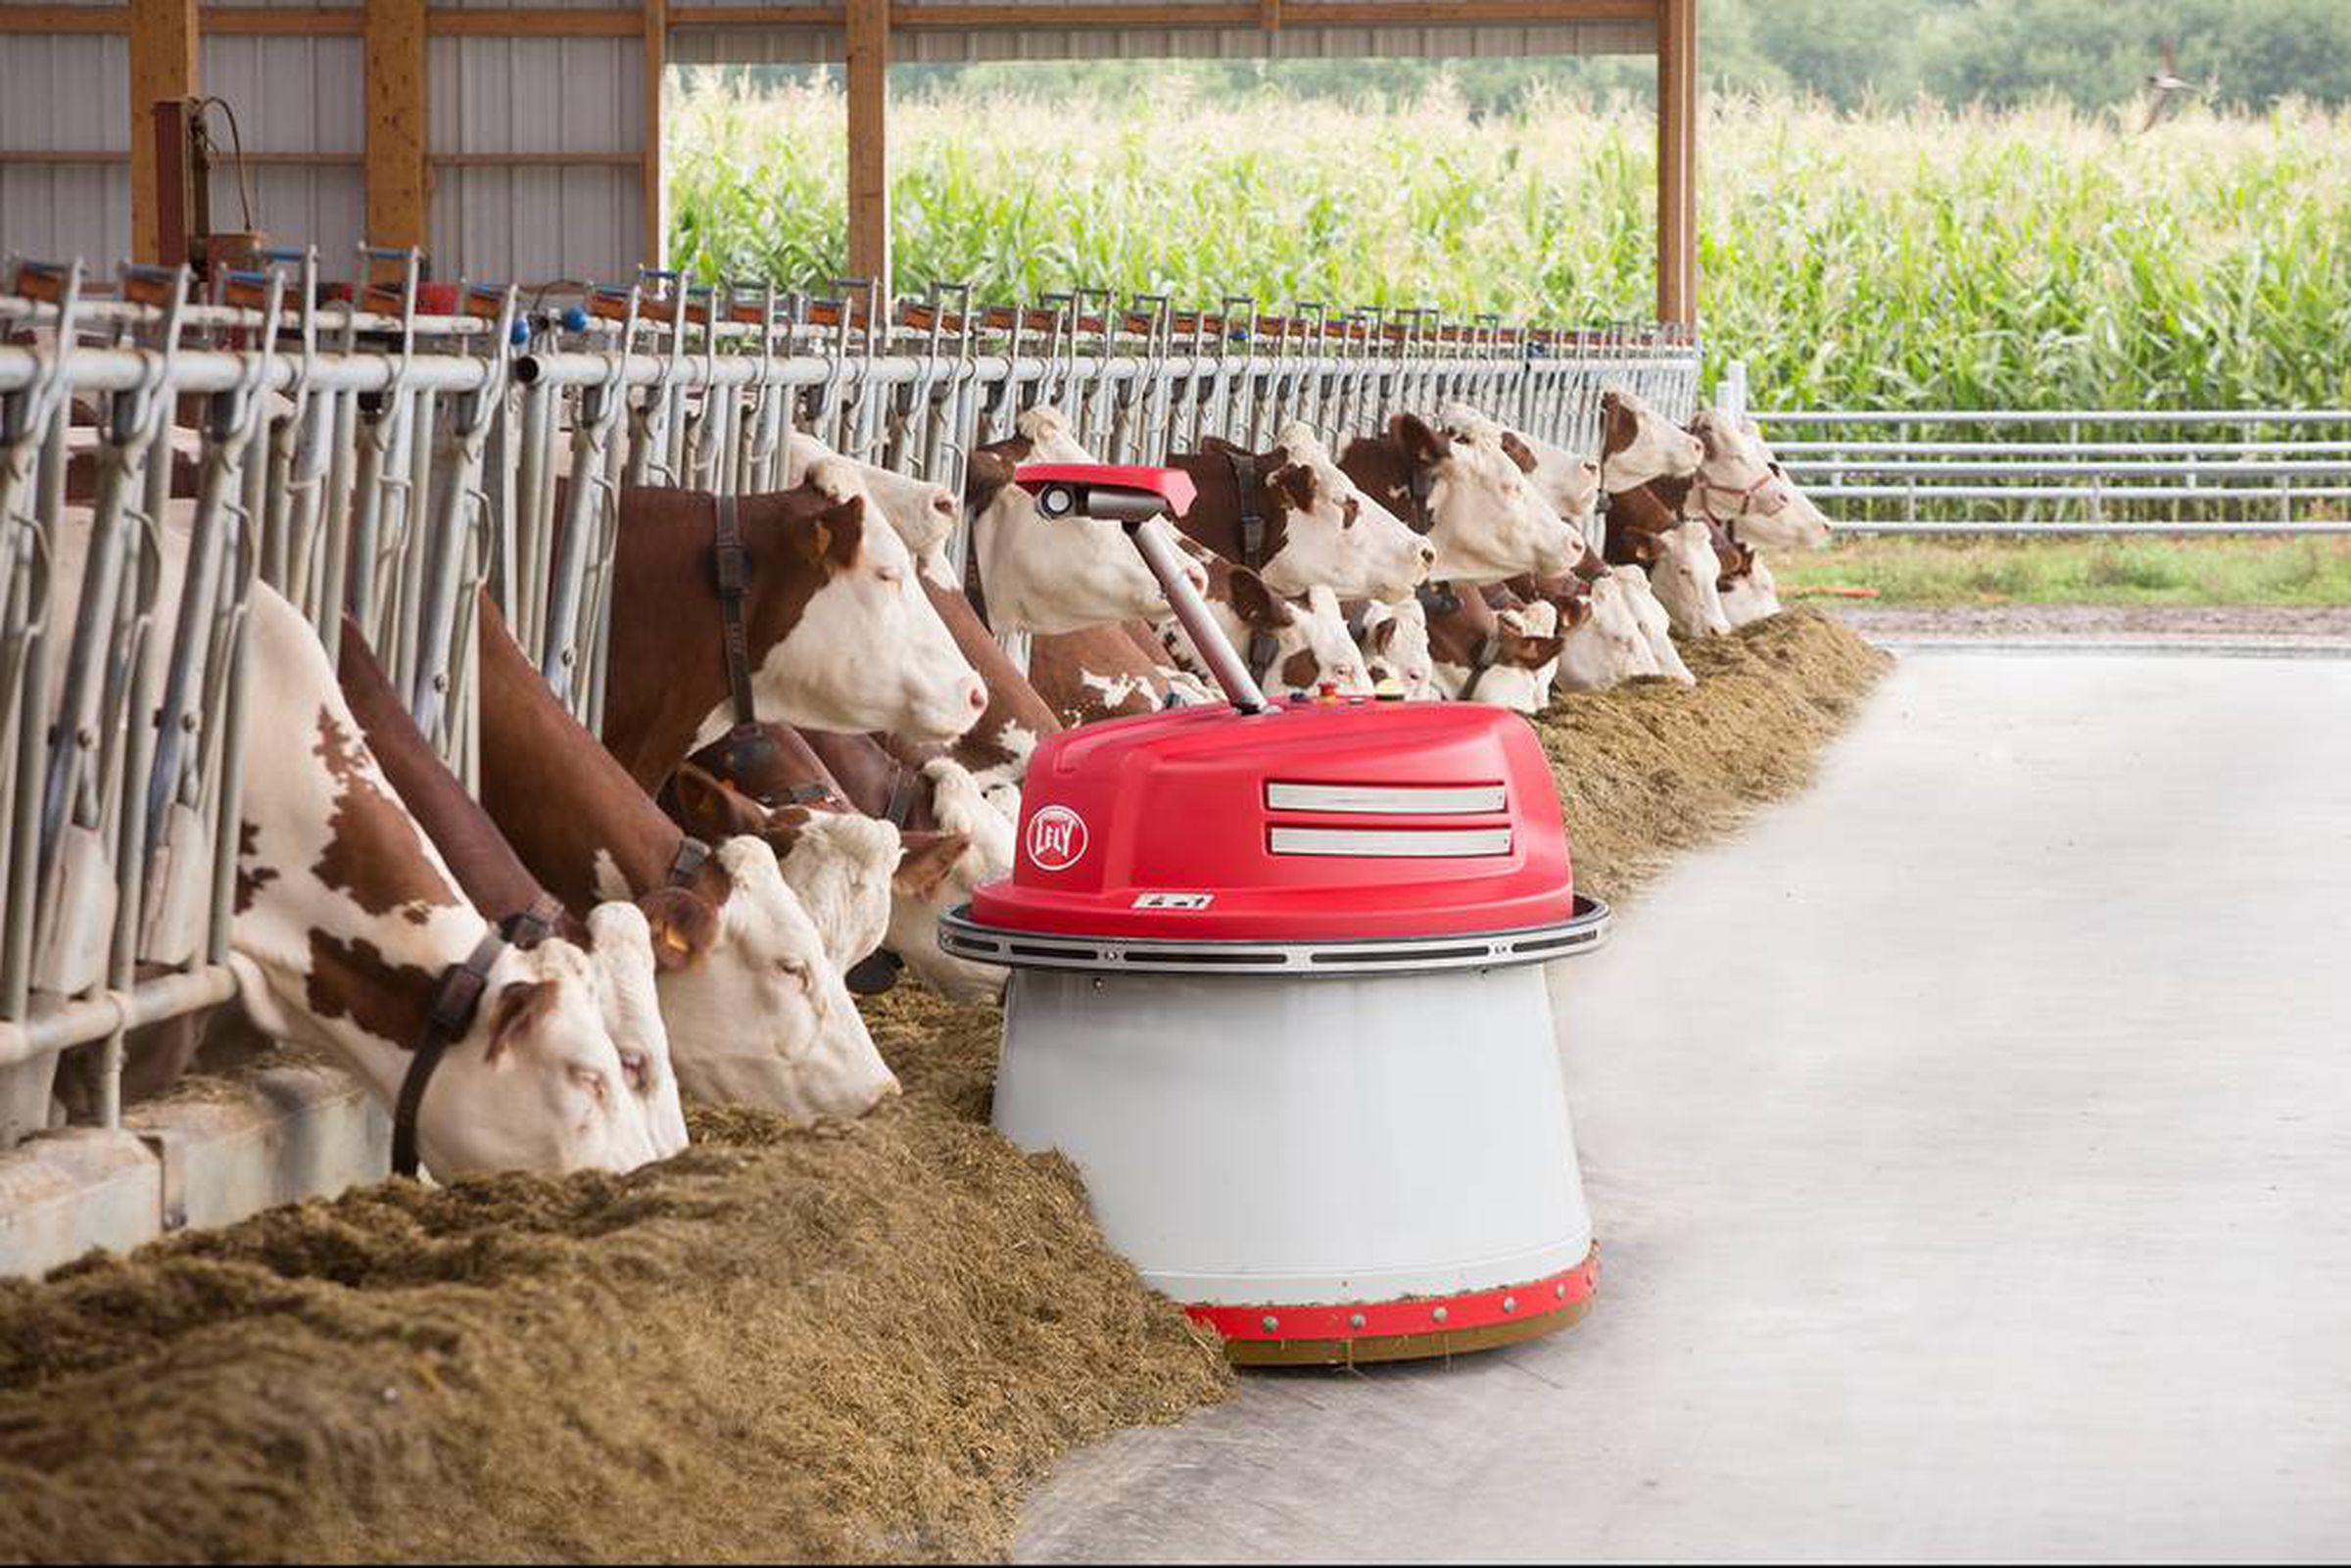 Robots are becoming increasingly common in agriculture, as with this machine made by Dutch firm Lely, which pushes cattle feed back toward their pens.